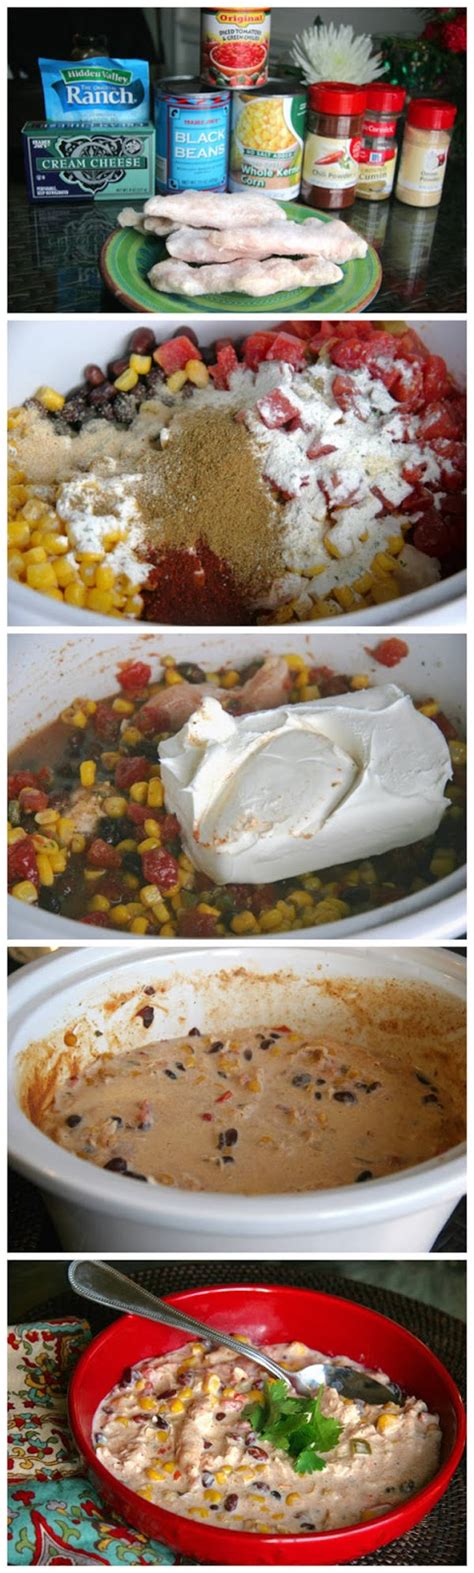 Stir the ingredients every two hours. Crock Pot Cream Cheese Chicken Chili | cookglee recipe ...